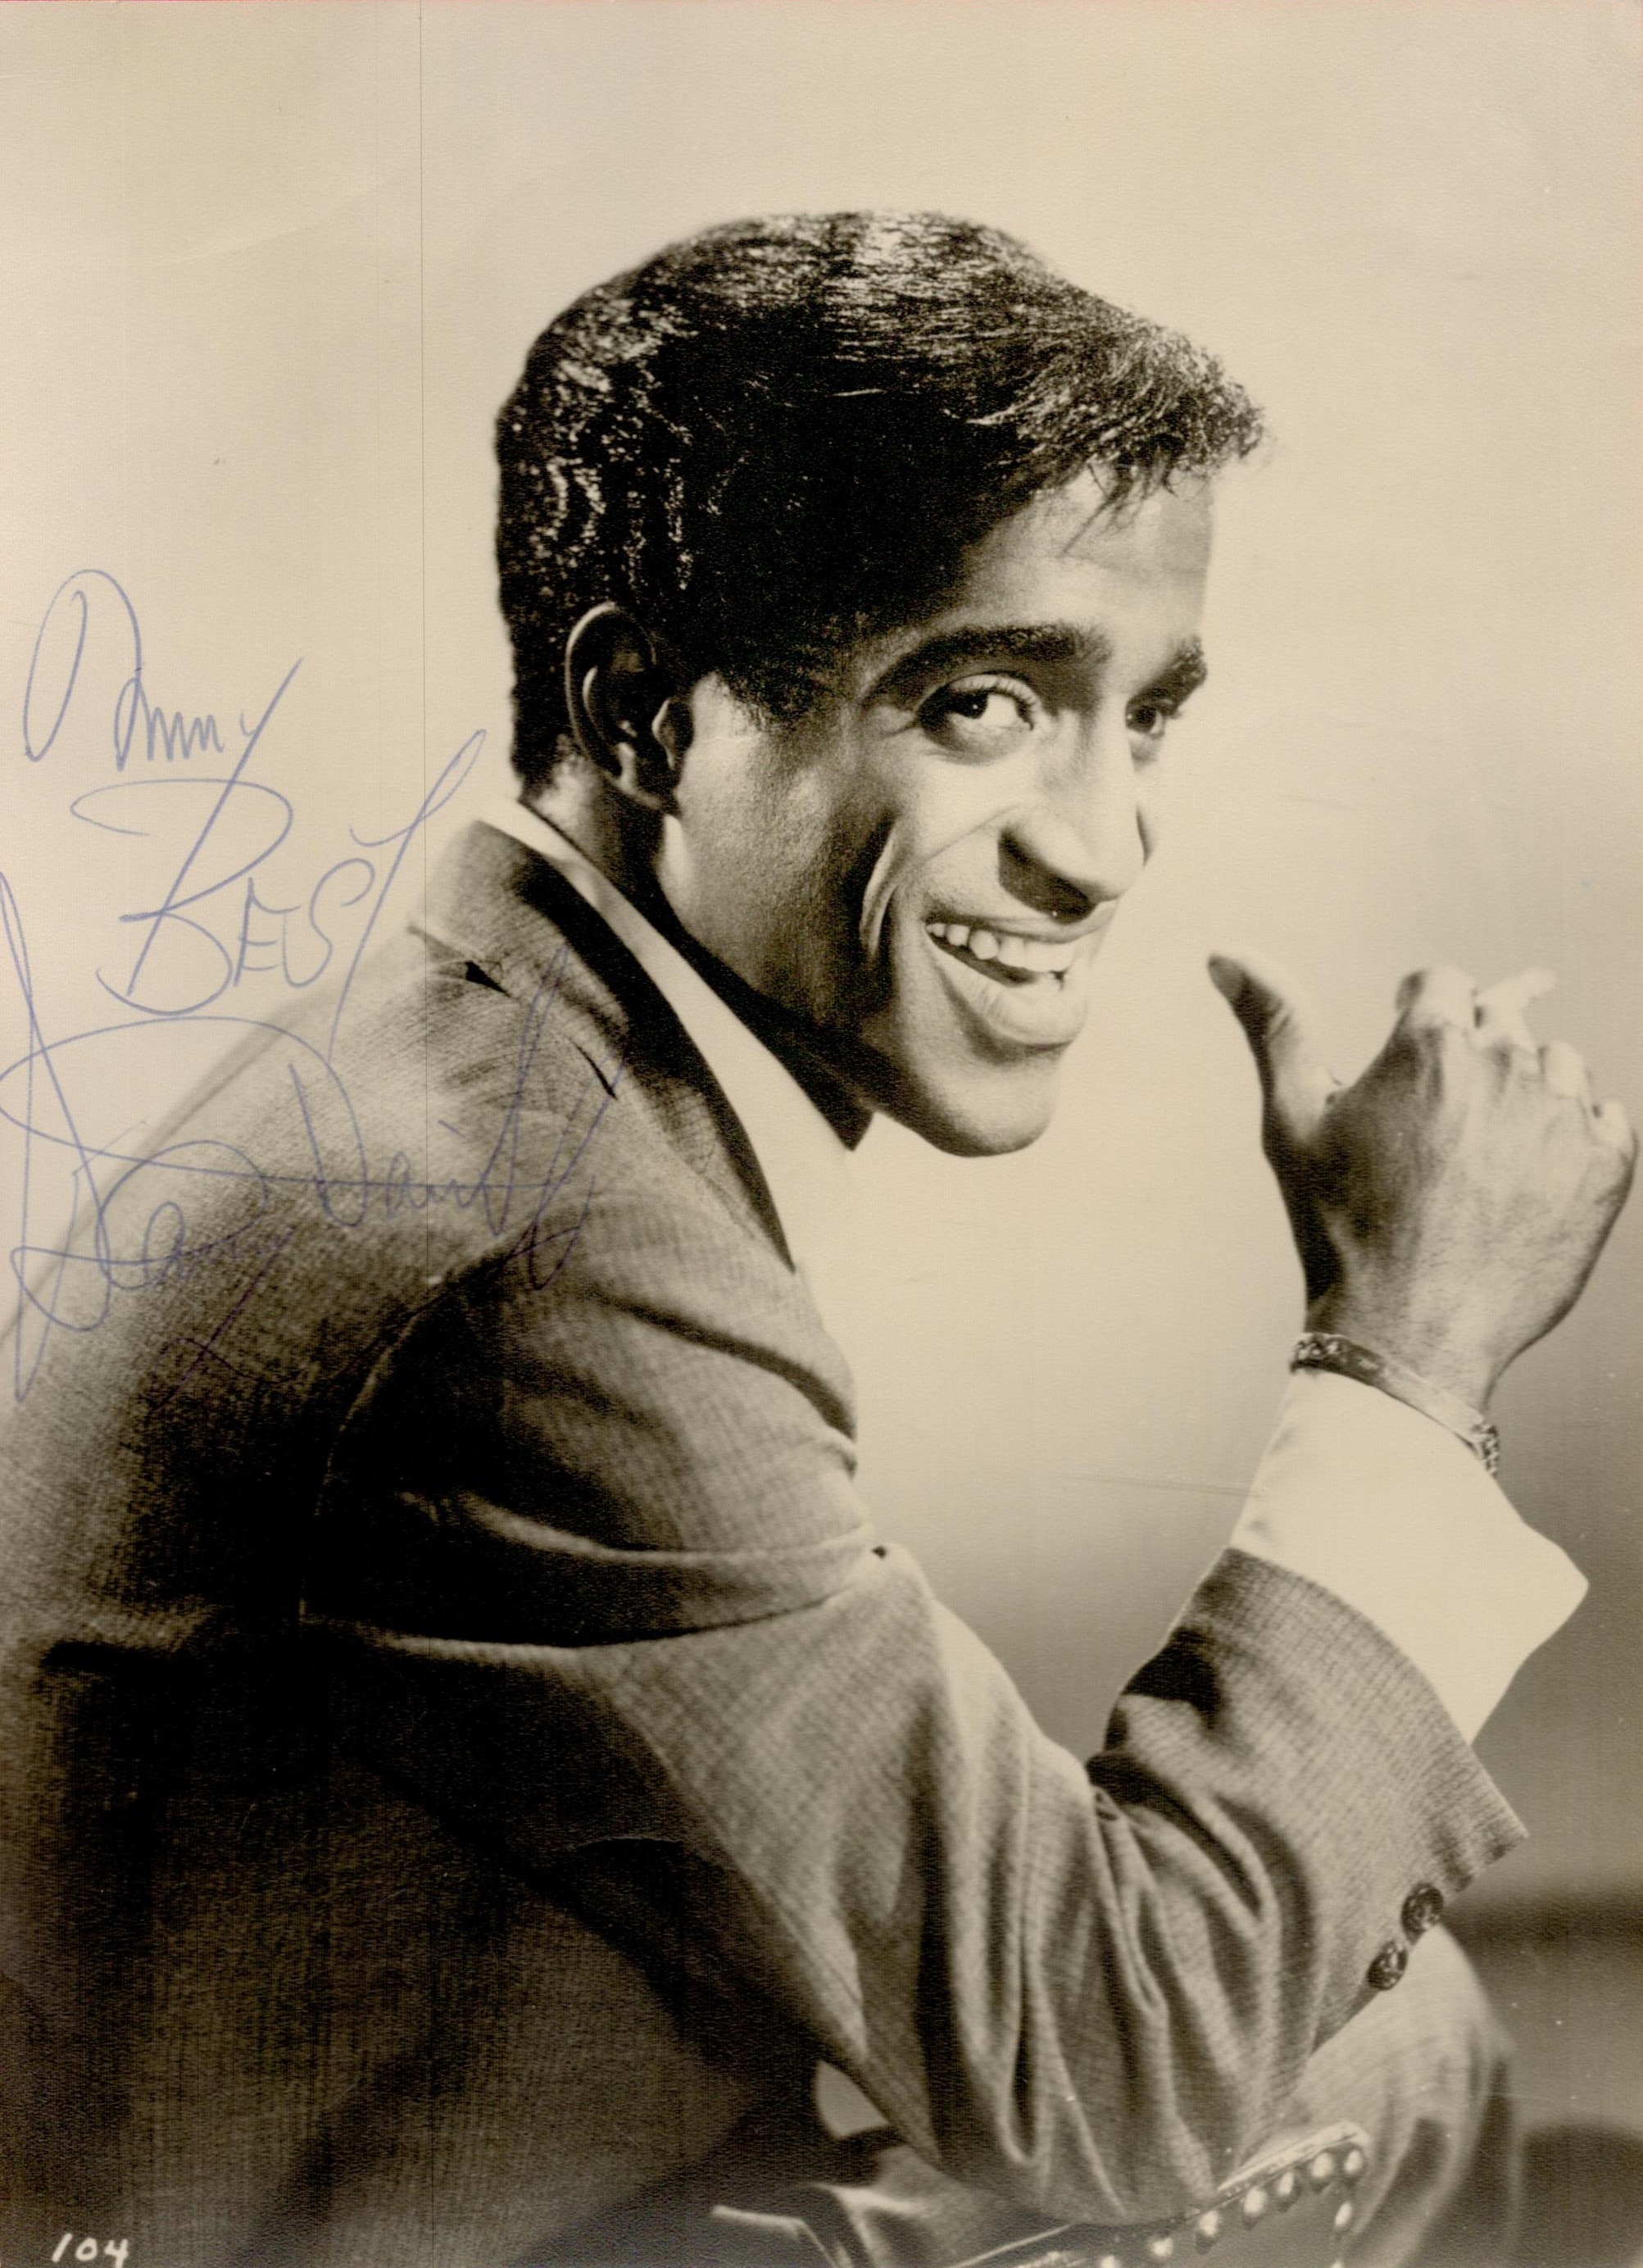 Sammy Davis Jr Signed 9x7 inch approx Vintage Black and White Photo. Signed in blue ink. Good